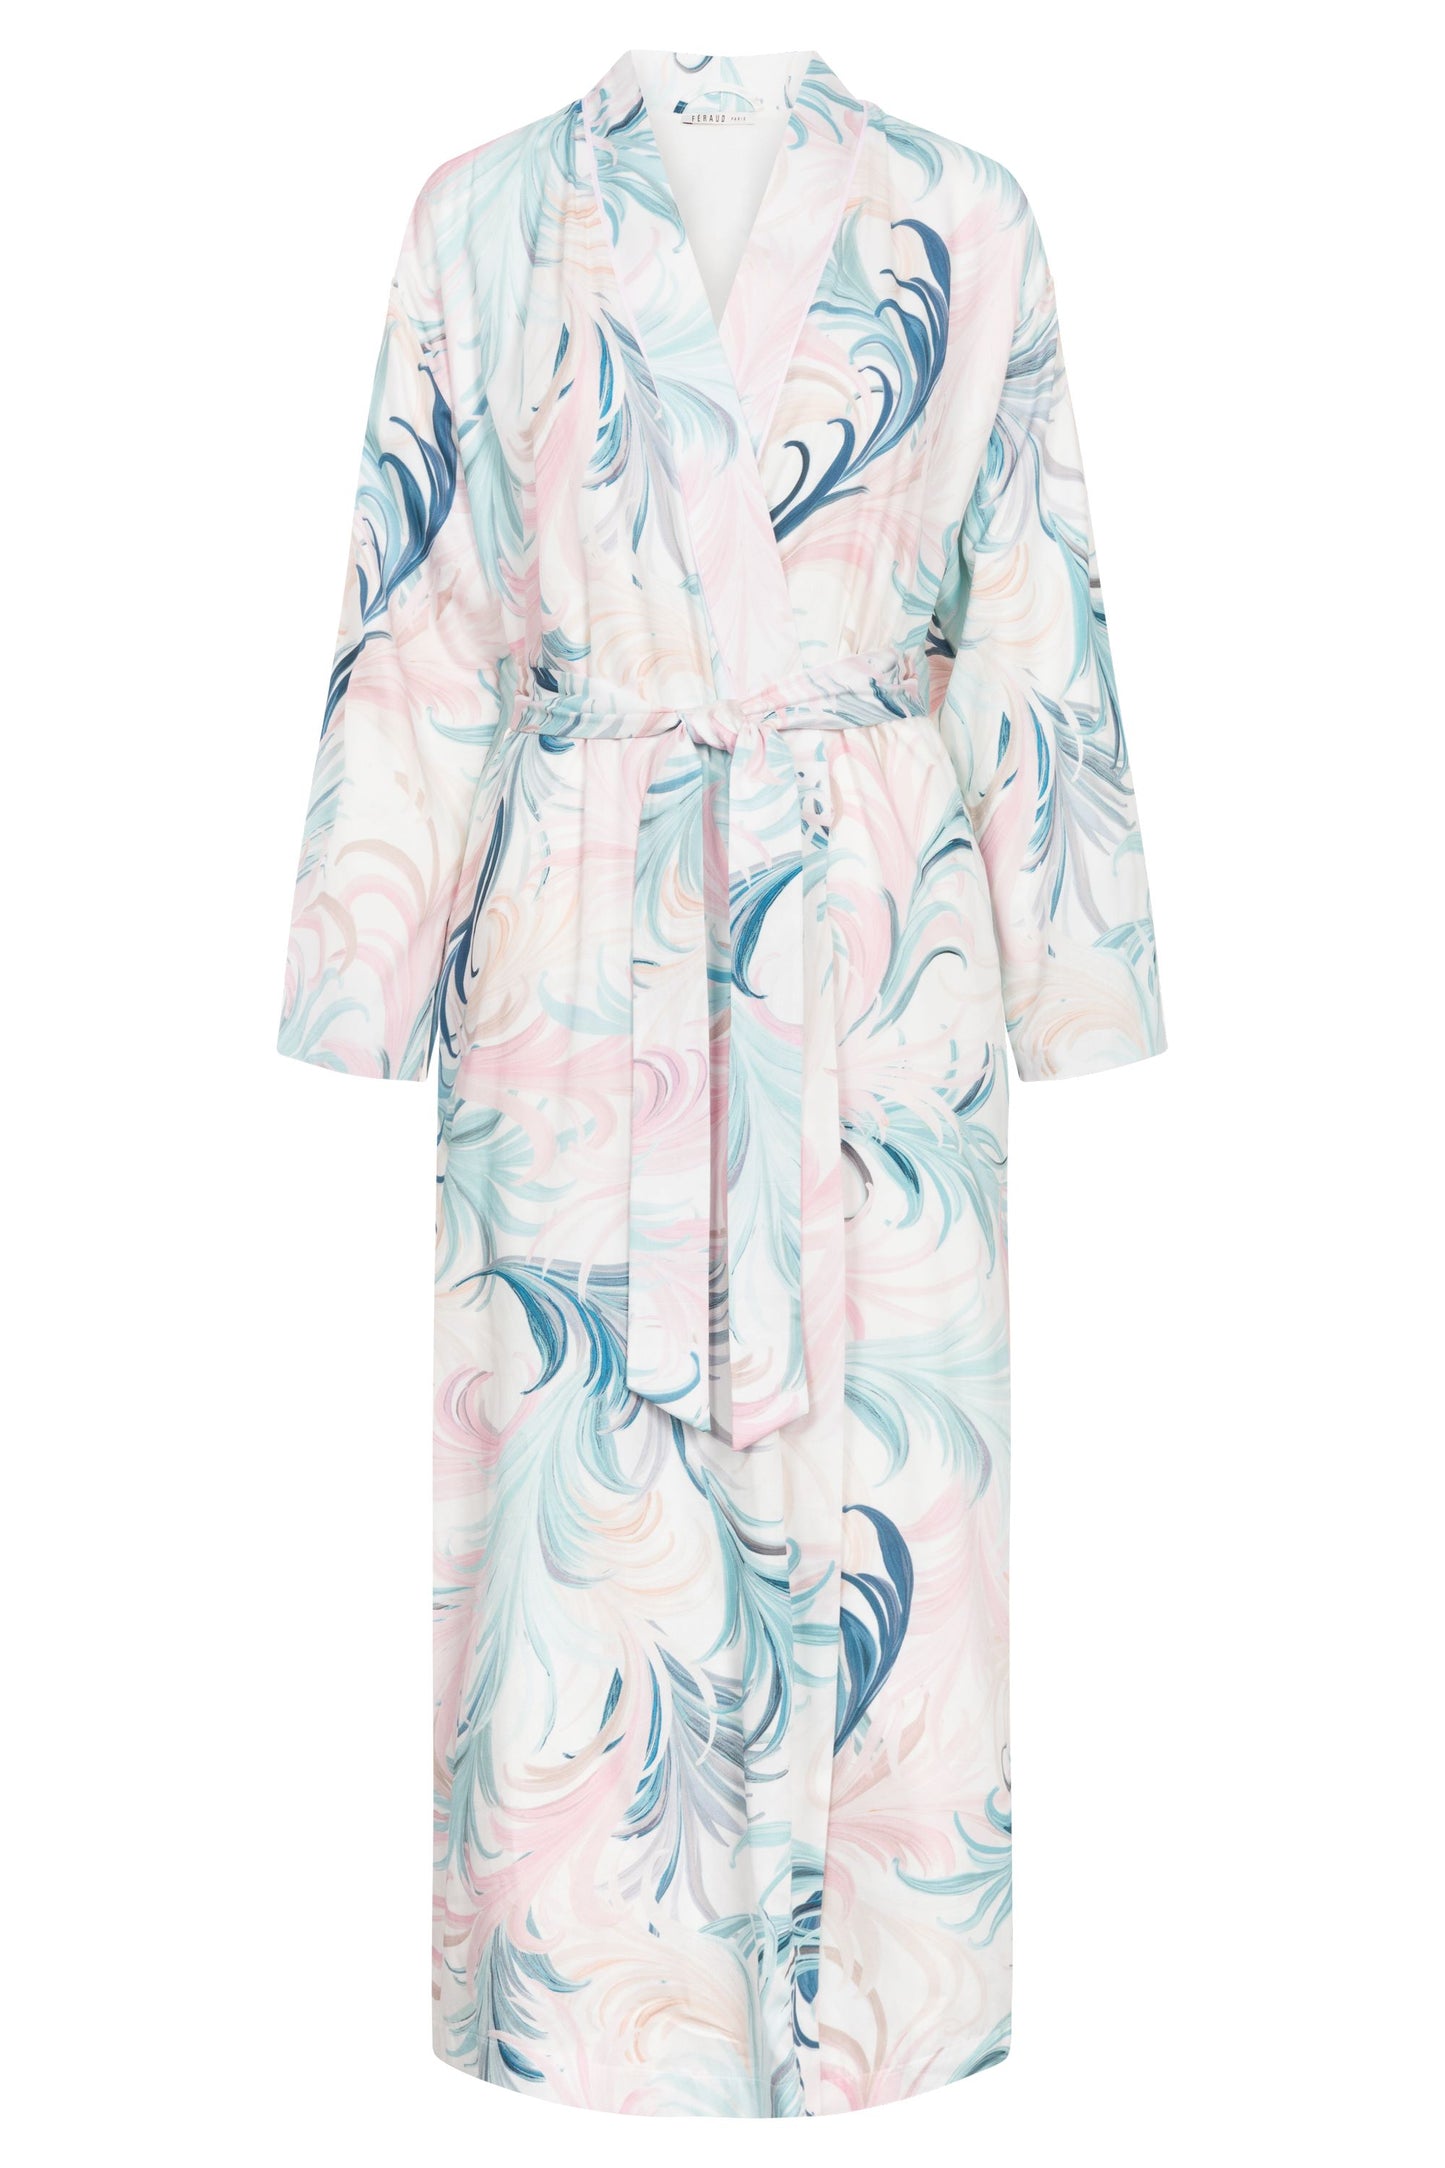 The High Class line from Féraud Paris offers a luxurious kimono-styled robe with cotton satin and terrycloth lining, featuring a romantic feather pattern.